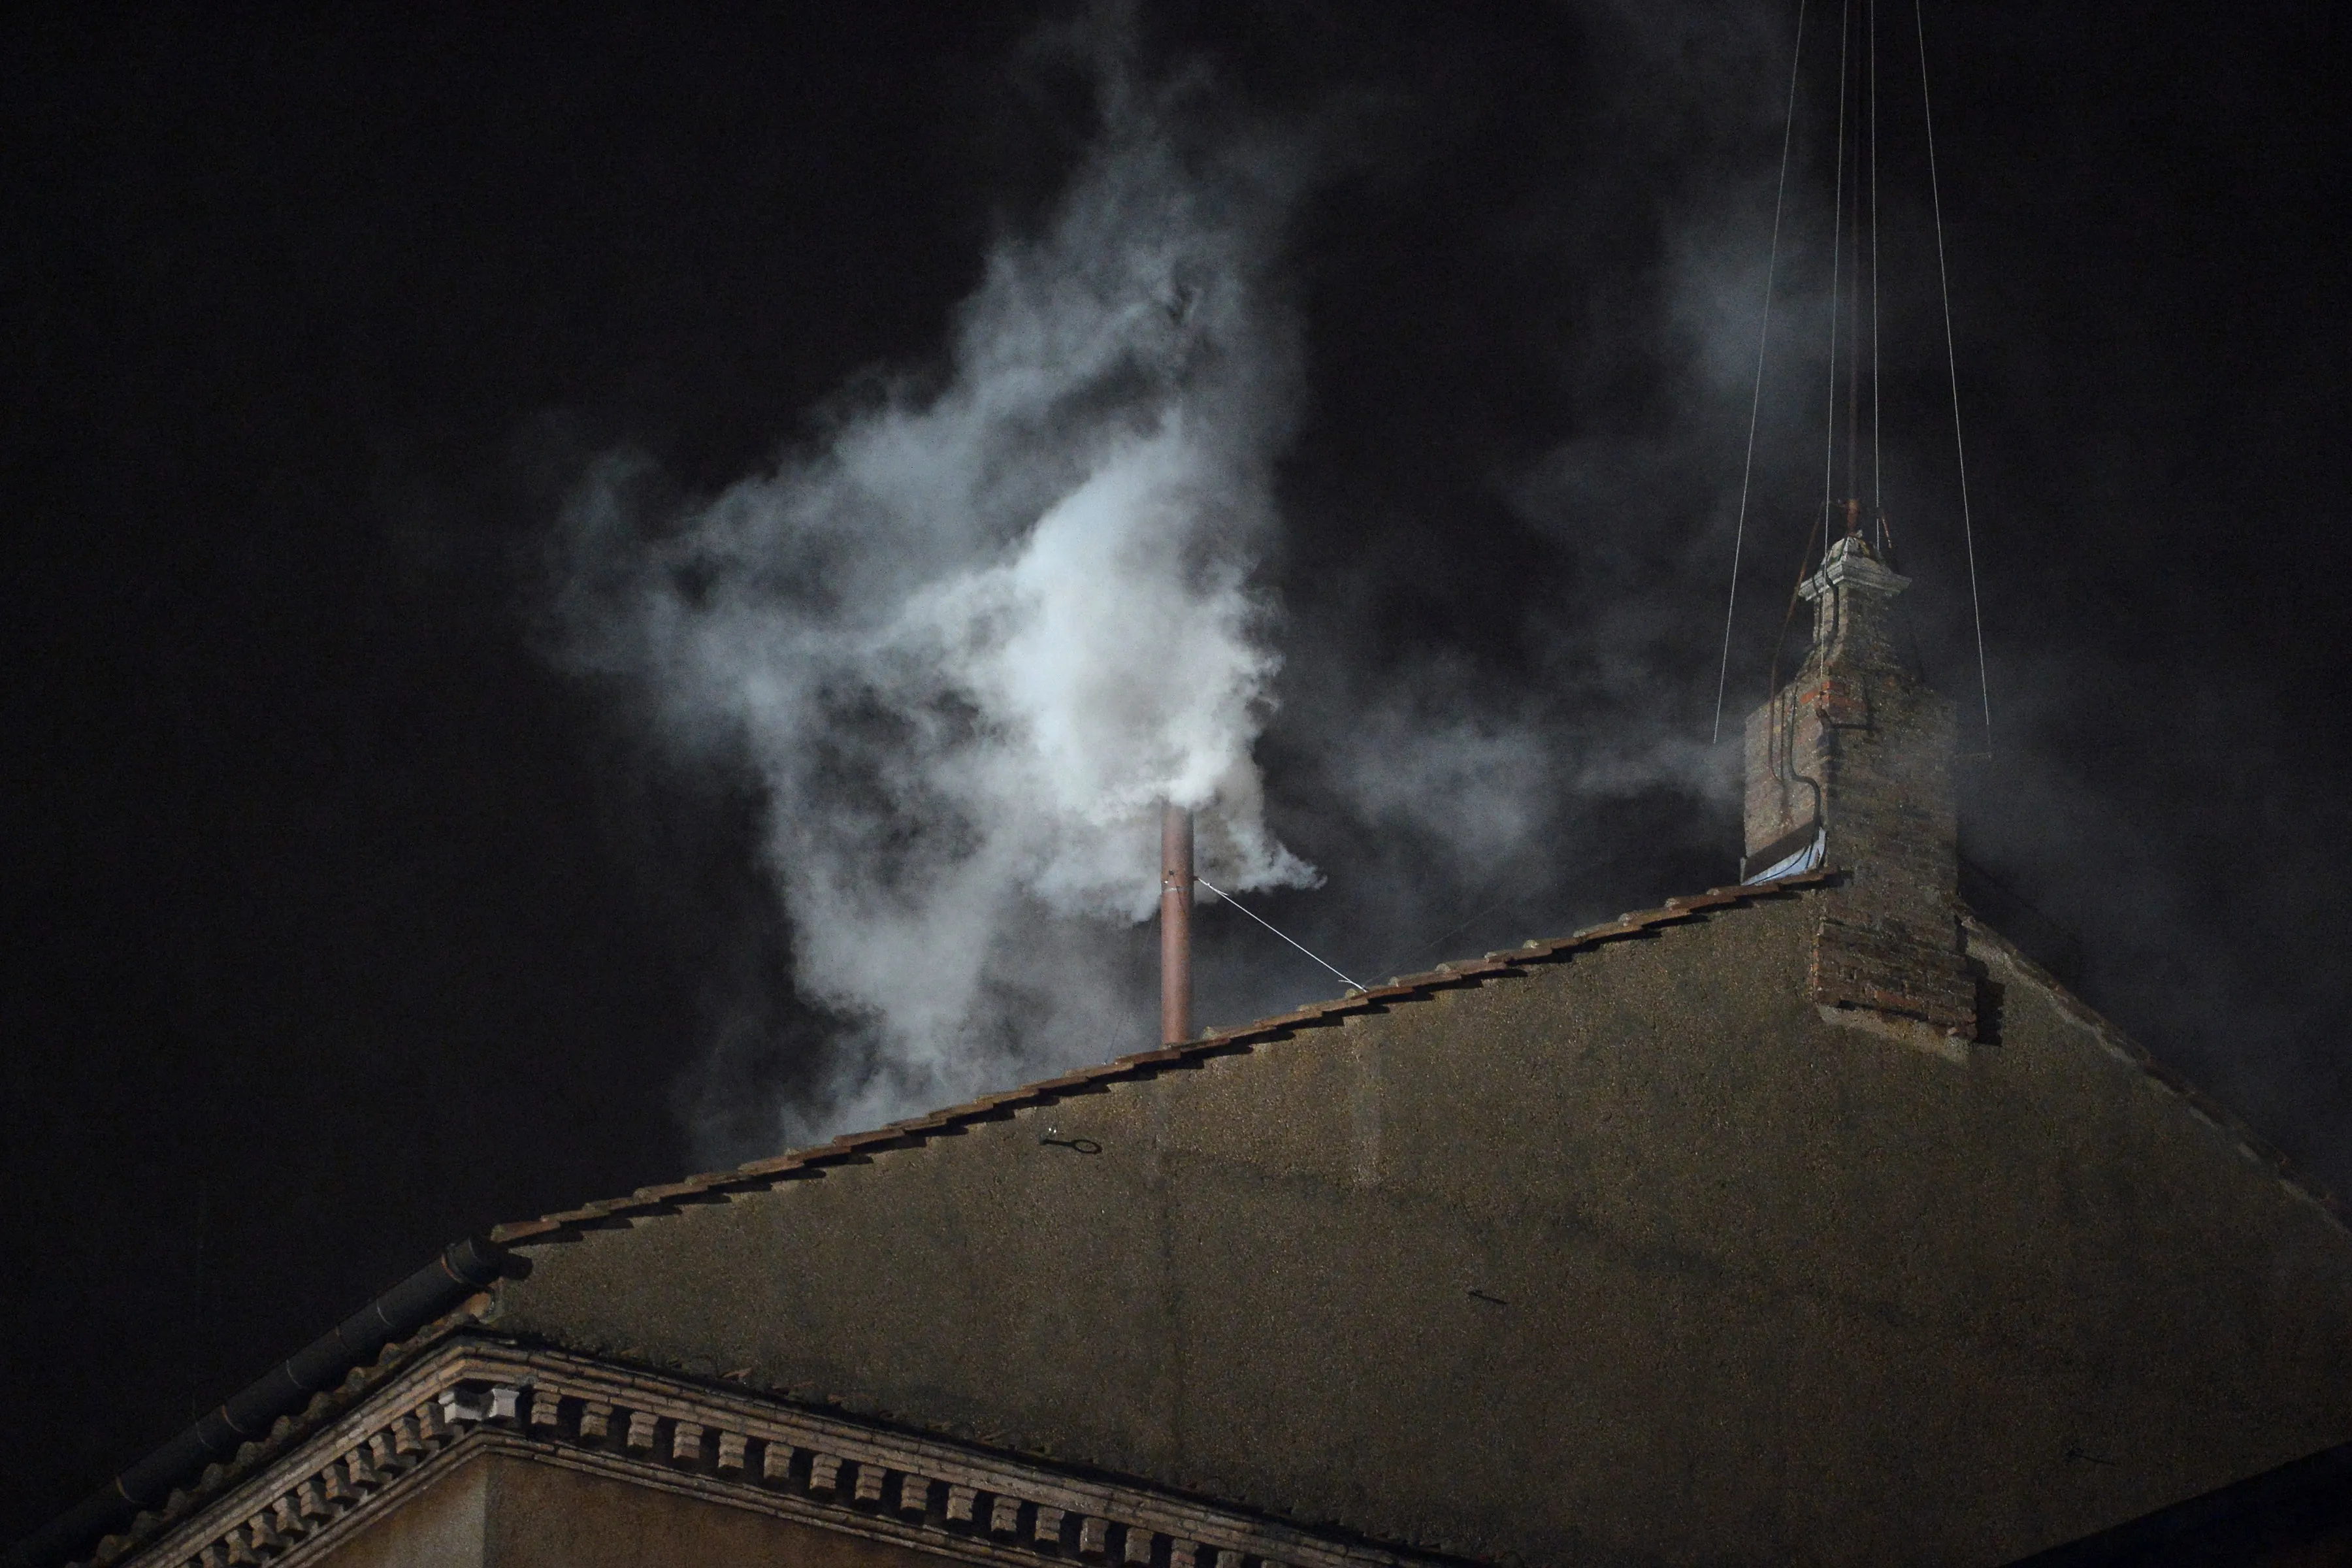 White smoke rises from the chimney of the Sistine Chapel on March 13, 2013, signaling that the College of Cardinals has elected a new pope.?w=200&h=150